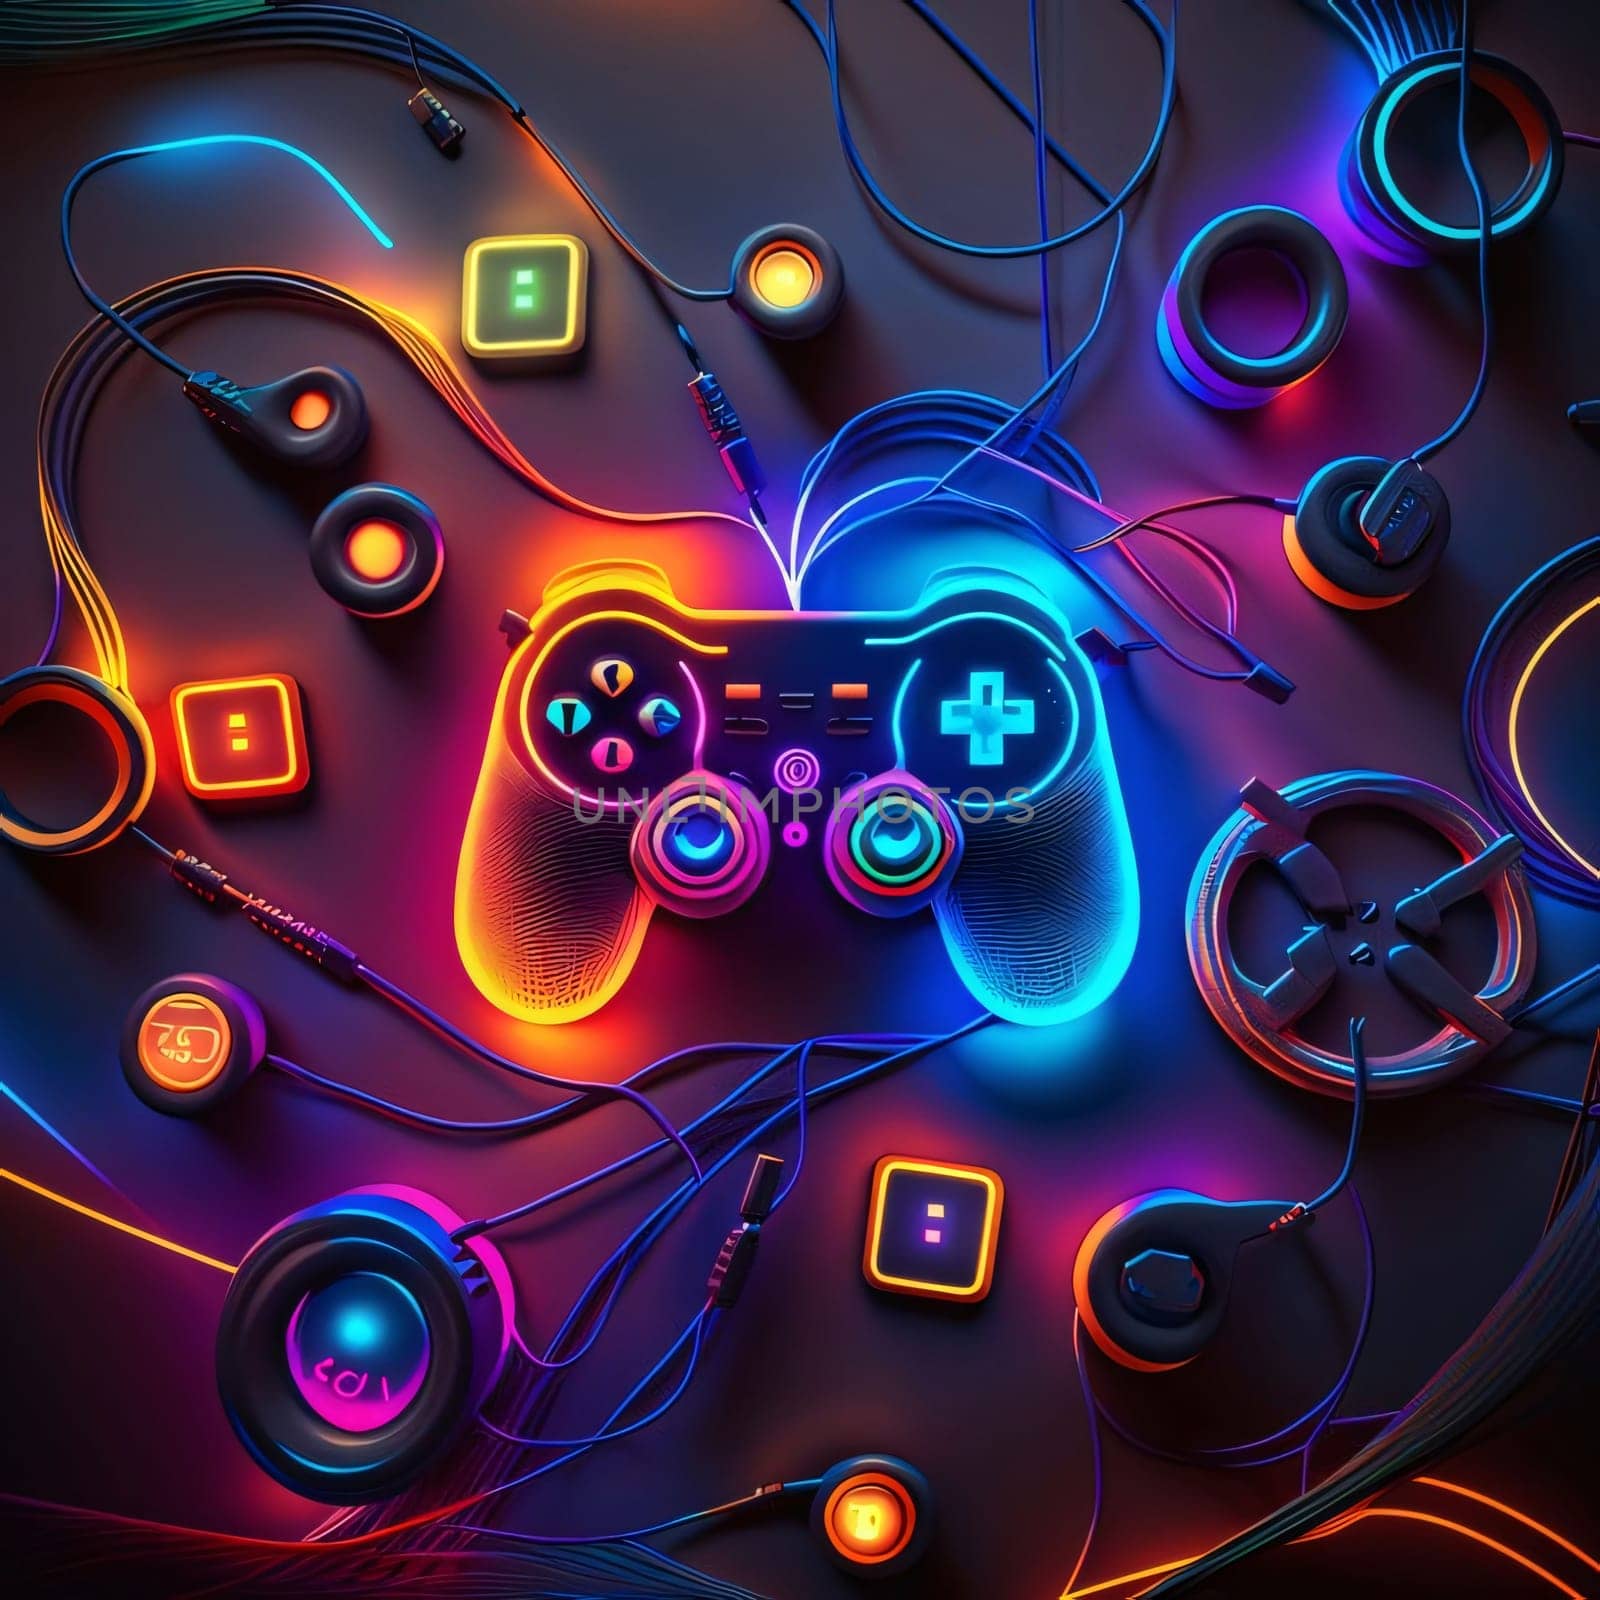 Abstract background design: Neon gamepad with headphones on a dark background. 3d rendering